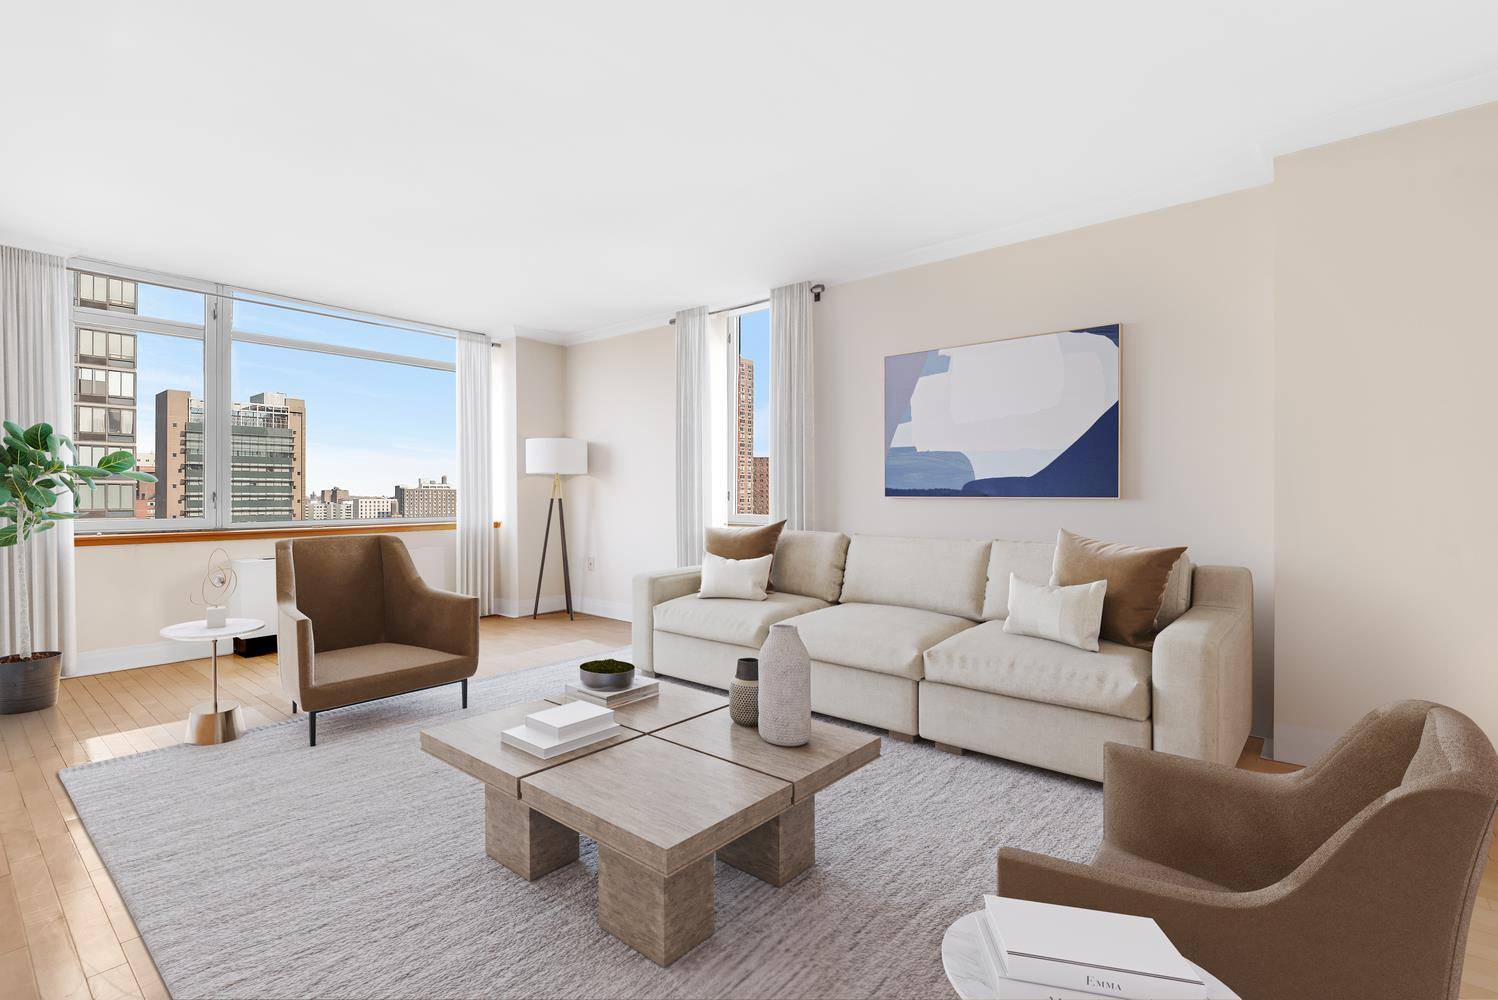 Welcome to 15A, a spacious and serene corner condo boasting759 sq ft in The Chartwell House, a luxurious condominium on the Upper EastSide.